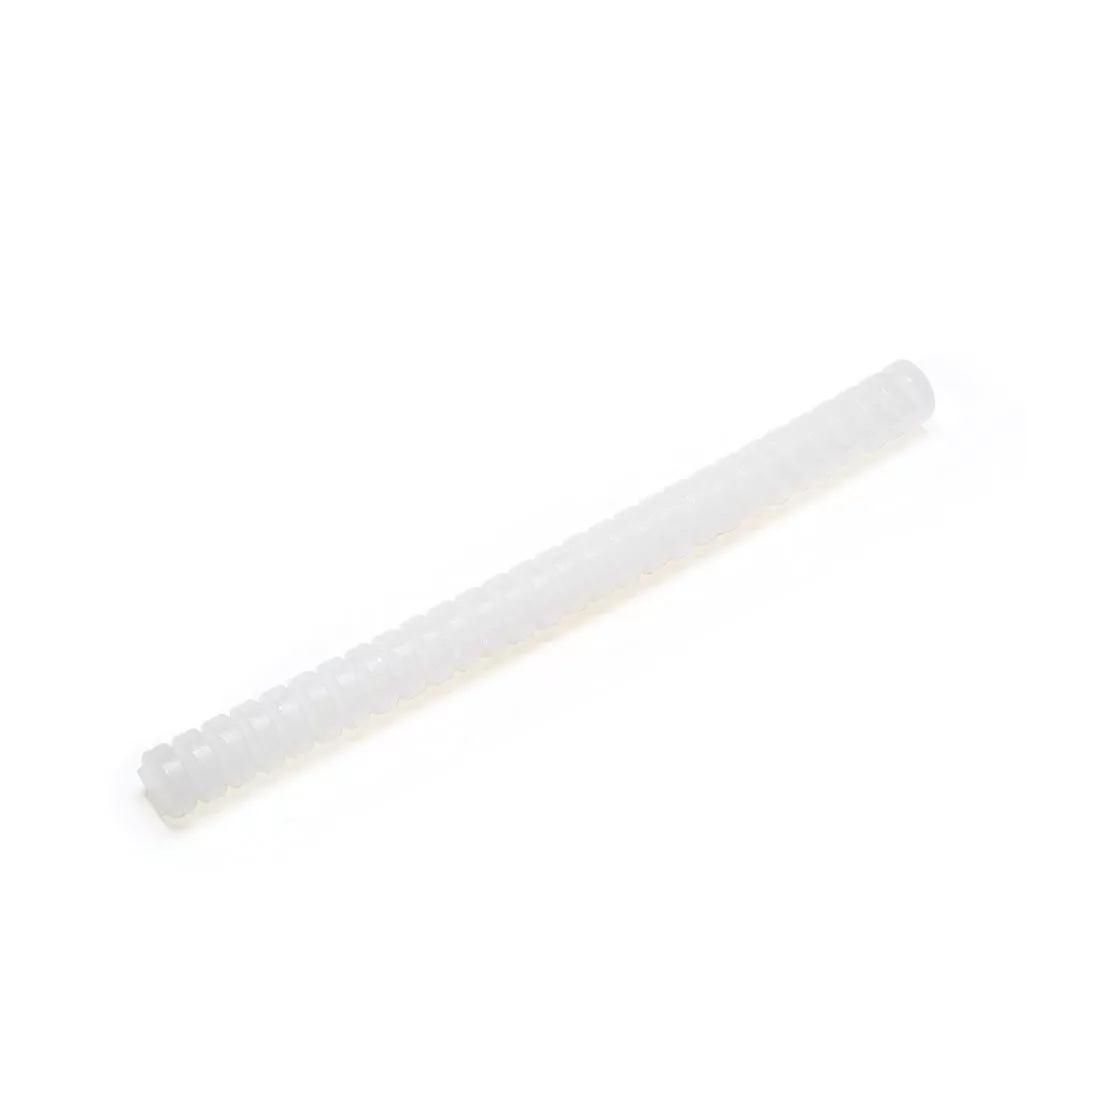 3M™ Hot Melt Adhesive 3792 Q, Clear, 5/8 in x 8 in, 11 lb/case